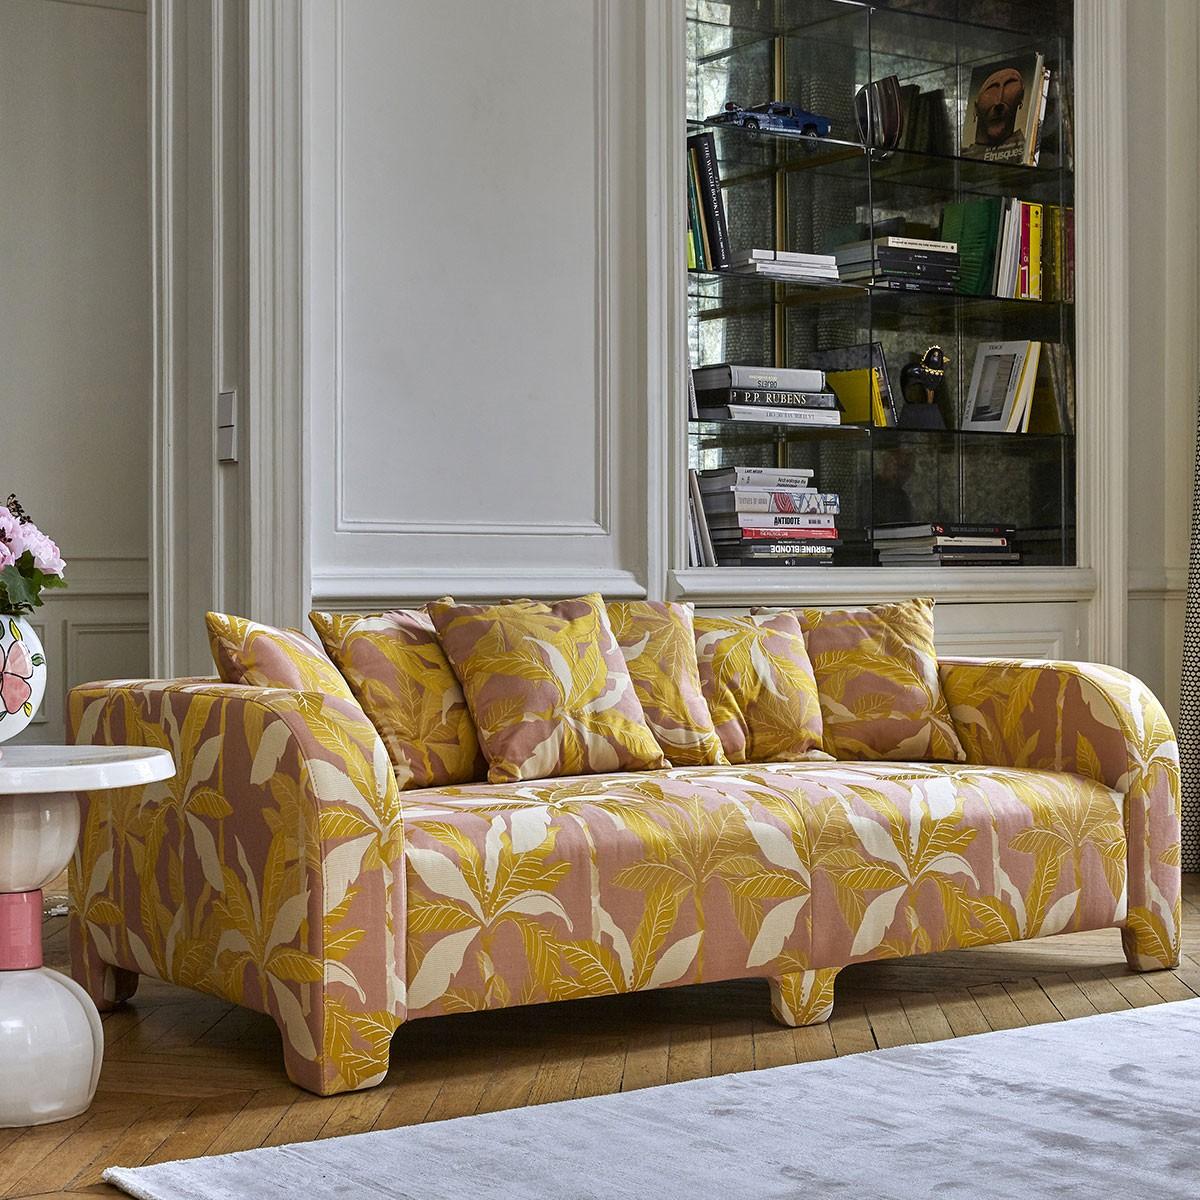 Popus editions Graziella 3 seater sofa in pink como velvet upholstery.

A foot that hides another. A cushion that hides another. A curve that hides another with contemporary lines and a base like a punctuation mark, this sofa gives pride of place